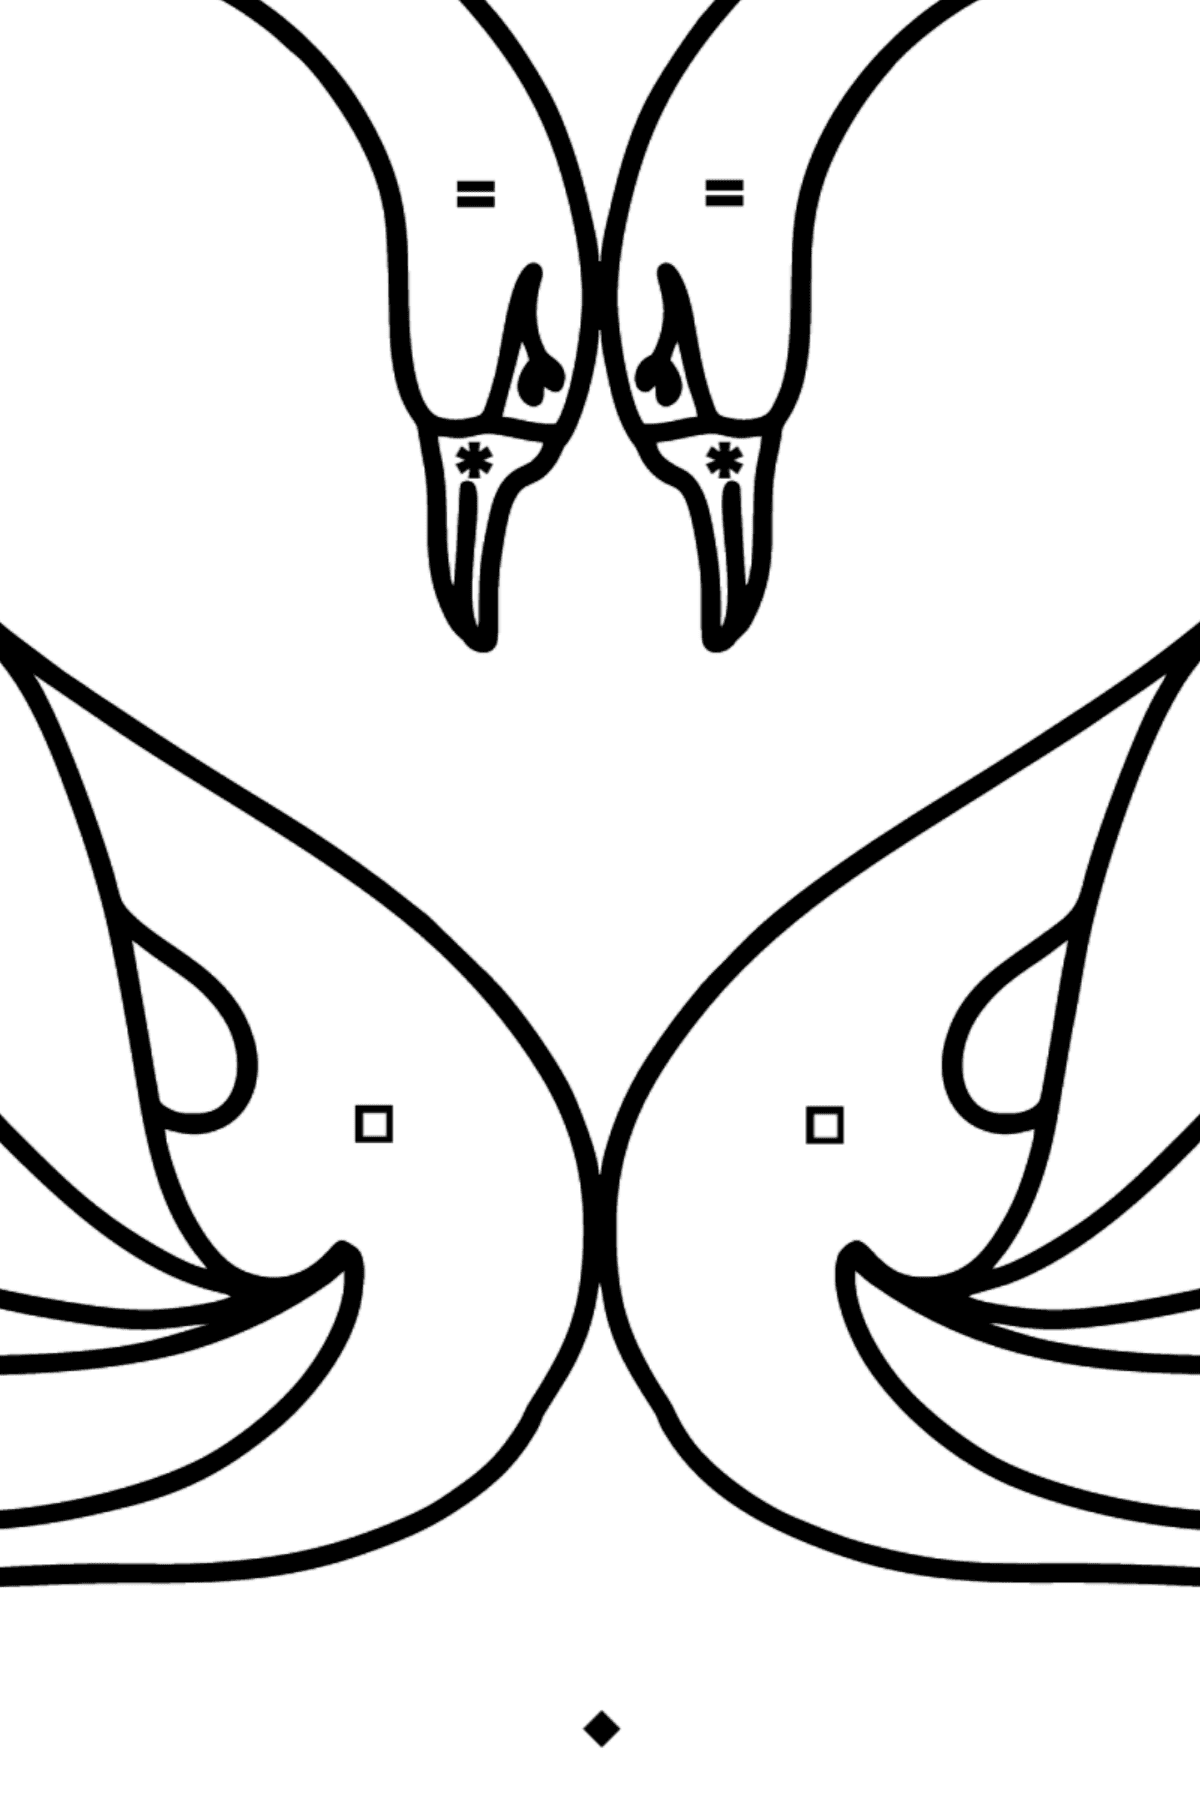 Black Swans coloring page - Coloring by Symbols for Kids